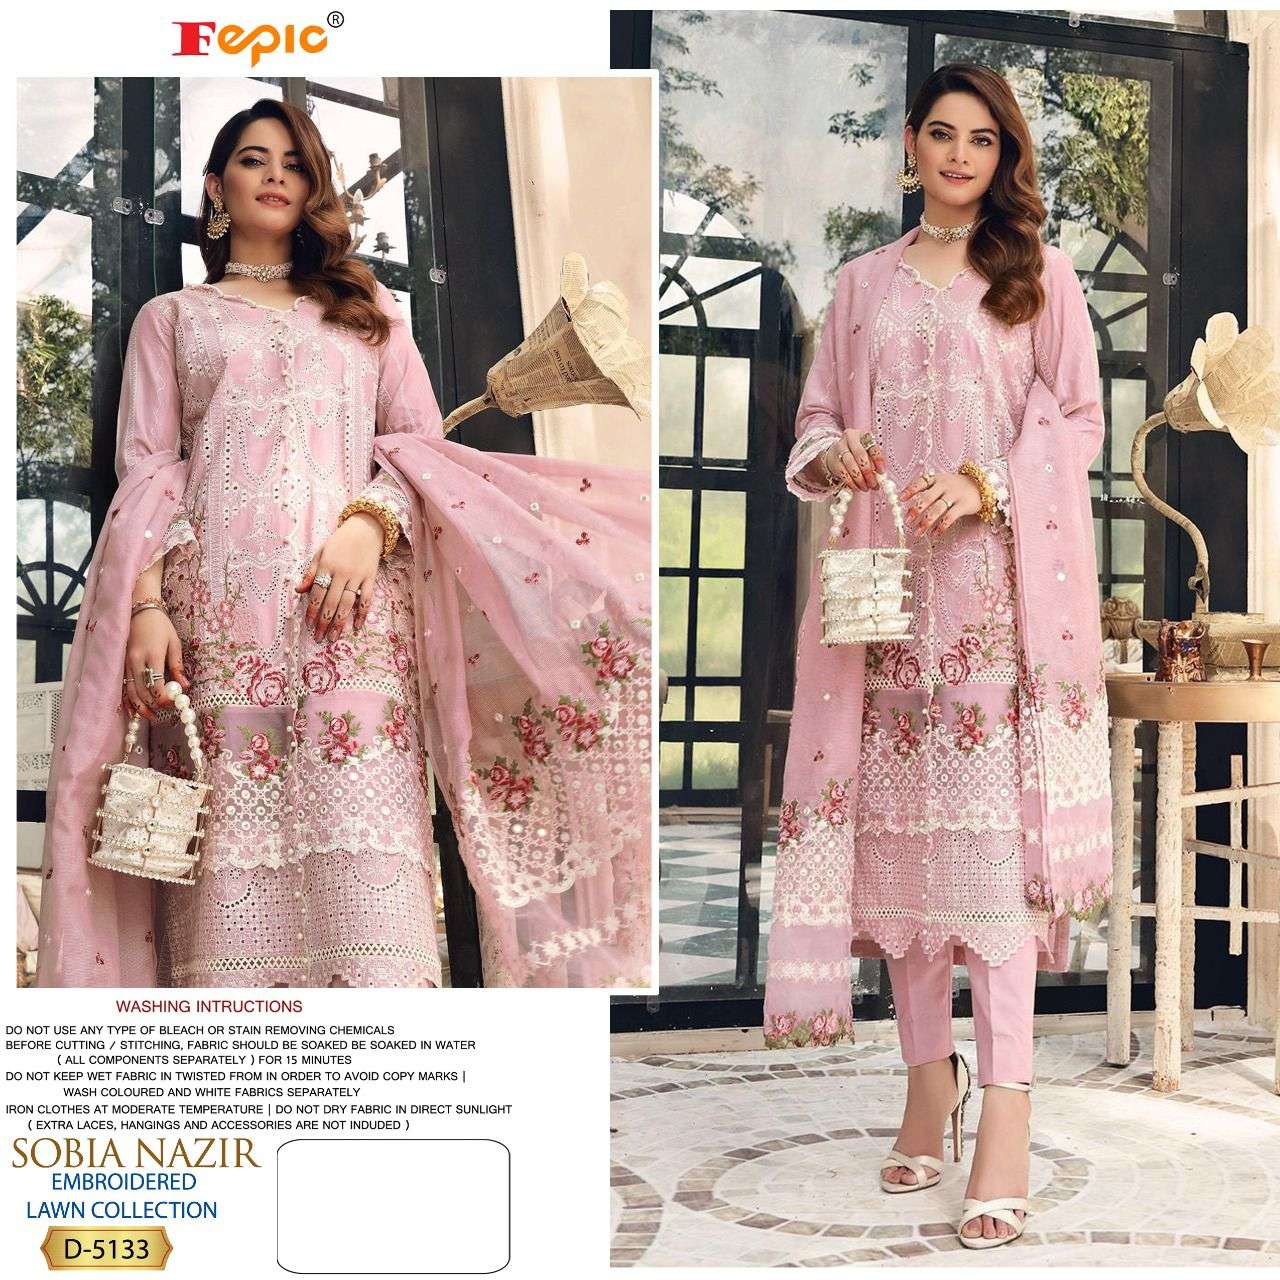 FEPIC PRESENTS ROSEMEEN SOBIA NAZIR HEAVY EMBROIDERY WHOLESALE PAKISTANI SUITS`